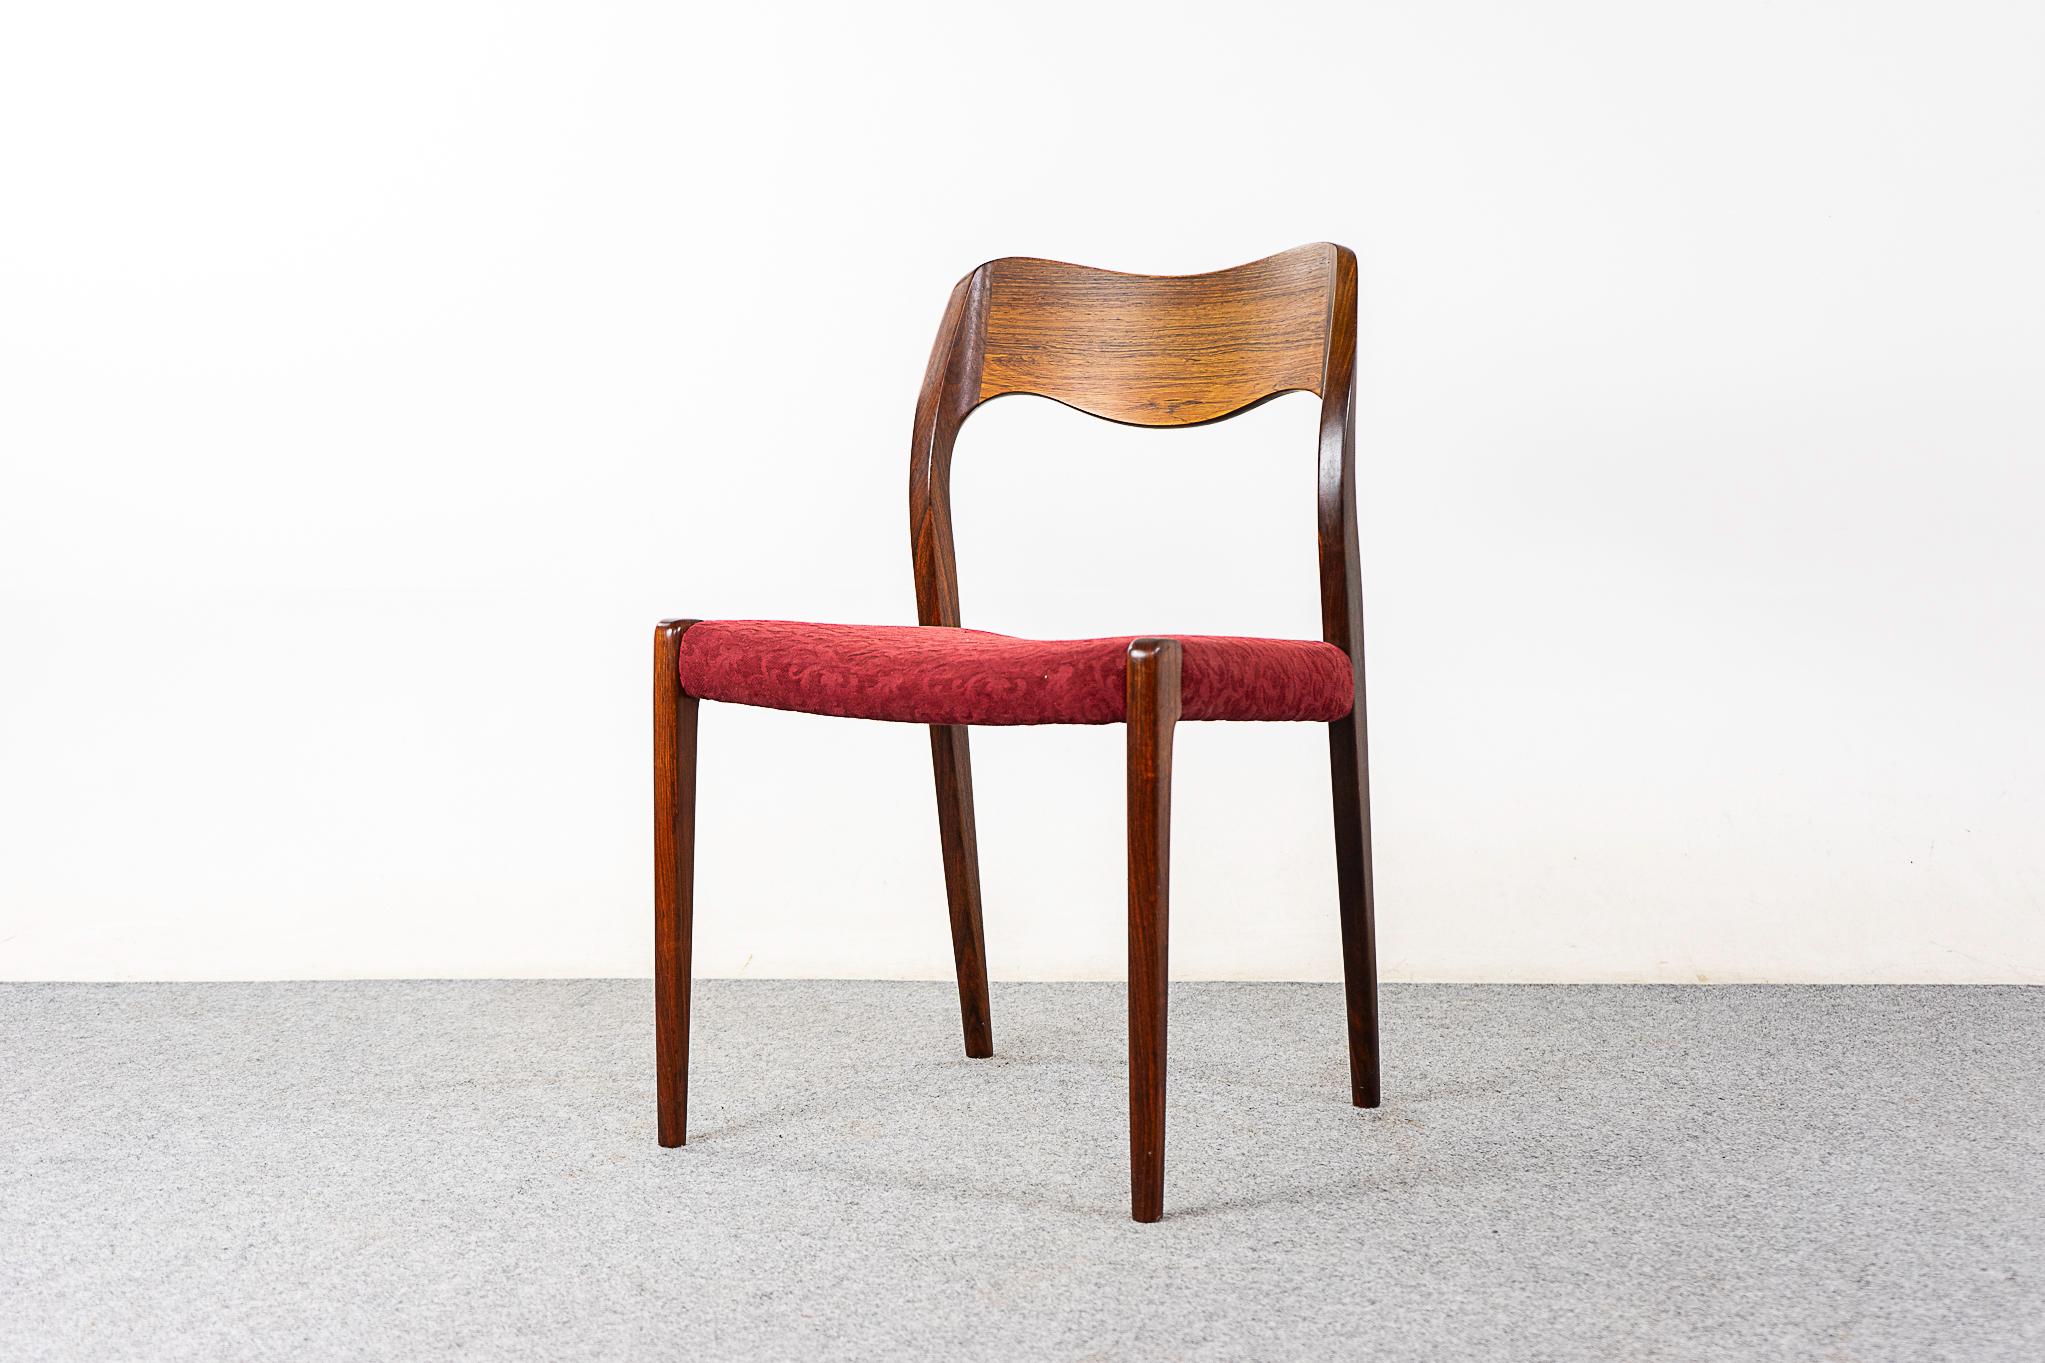 Set of 4 Rosewood Danish dining chairs by Niels Otto Moller for J.L Moller Mobelfabrik, circa 1960's. Highly sought after Model 71 design with signature curved backrest and elegant, graceful lines. Original upholstery with minor wear & tear. 